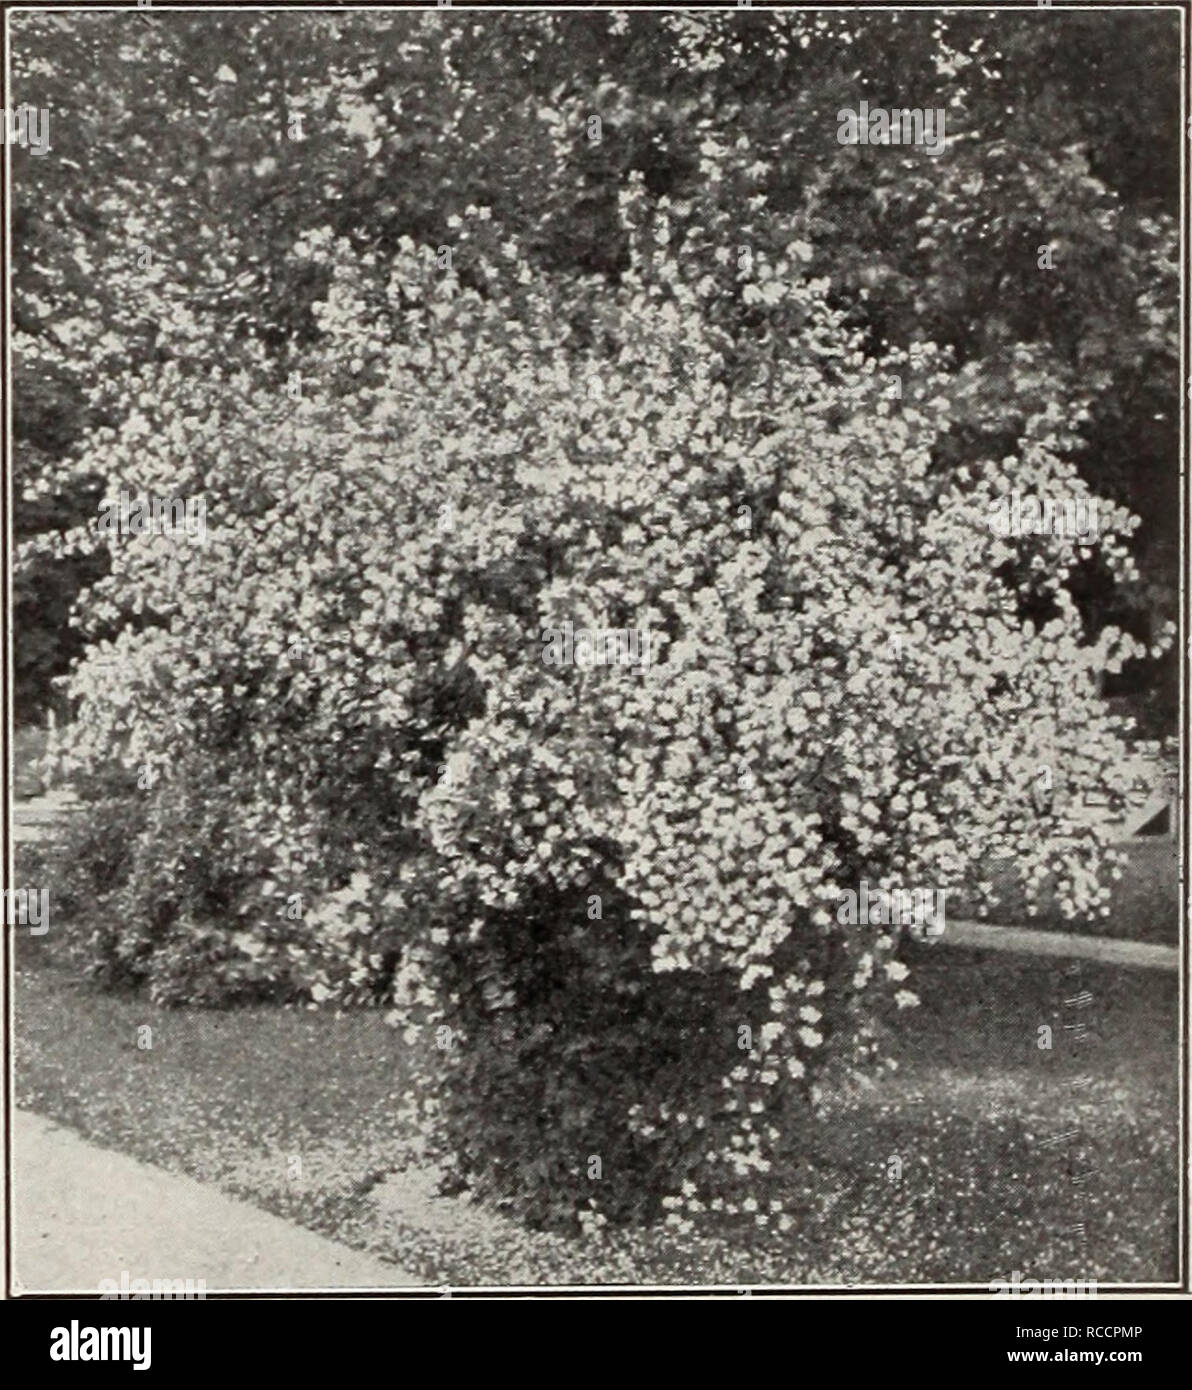 . Ellwanger &amp; Barry Mt Hope Nurseries 1916. Nurseries (Horticulture) Catalogs; Roses Seeds Catalogs; Strawberries Catalogs; Bulbs (Plants) Catalogs; Fruit Catalogs; Flowers Catalogs. LIGUSTRUM-PRIVET-Confinued var. Regelianum. Kegel's Privet. D. A val- uable hardy shrub with handsome, shining foli- age and horizontally spreading branches; desir- able when grown singly as a specimen, or in masses, or for hedges. A prostrate form of Ibota. 18 to 24 in., 35c each; 10 for $2.50; 100 for $20.00. L. ovalifolium. California Privet. D. A vig- orous, hardy variety, of fine habit and foliage; valuab Stock Photo